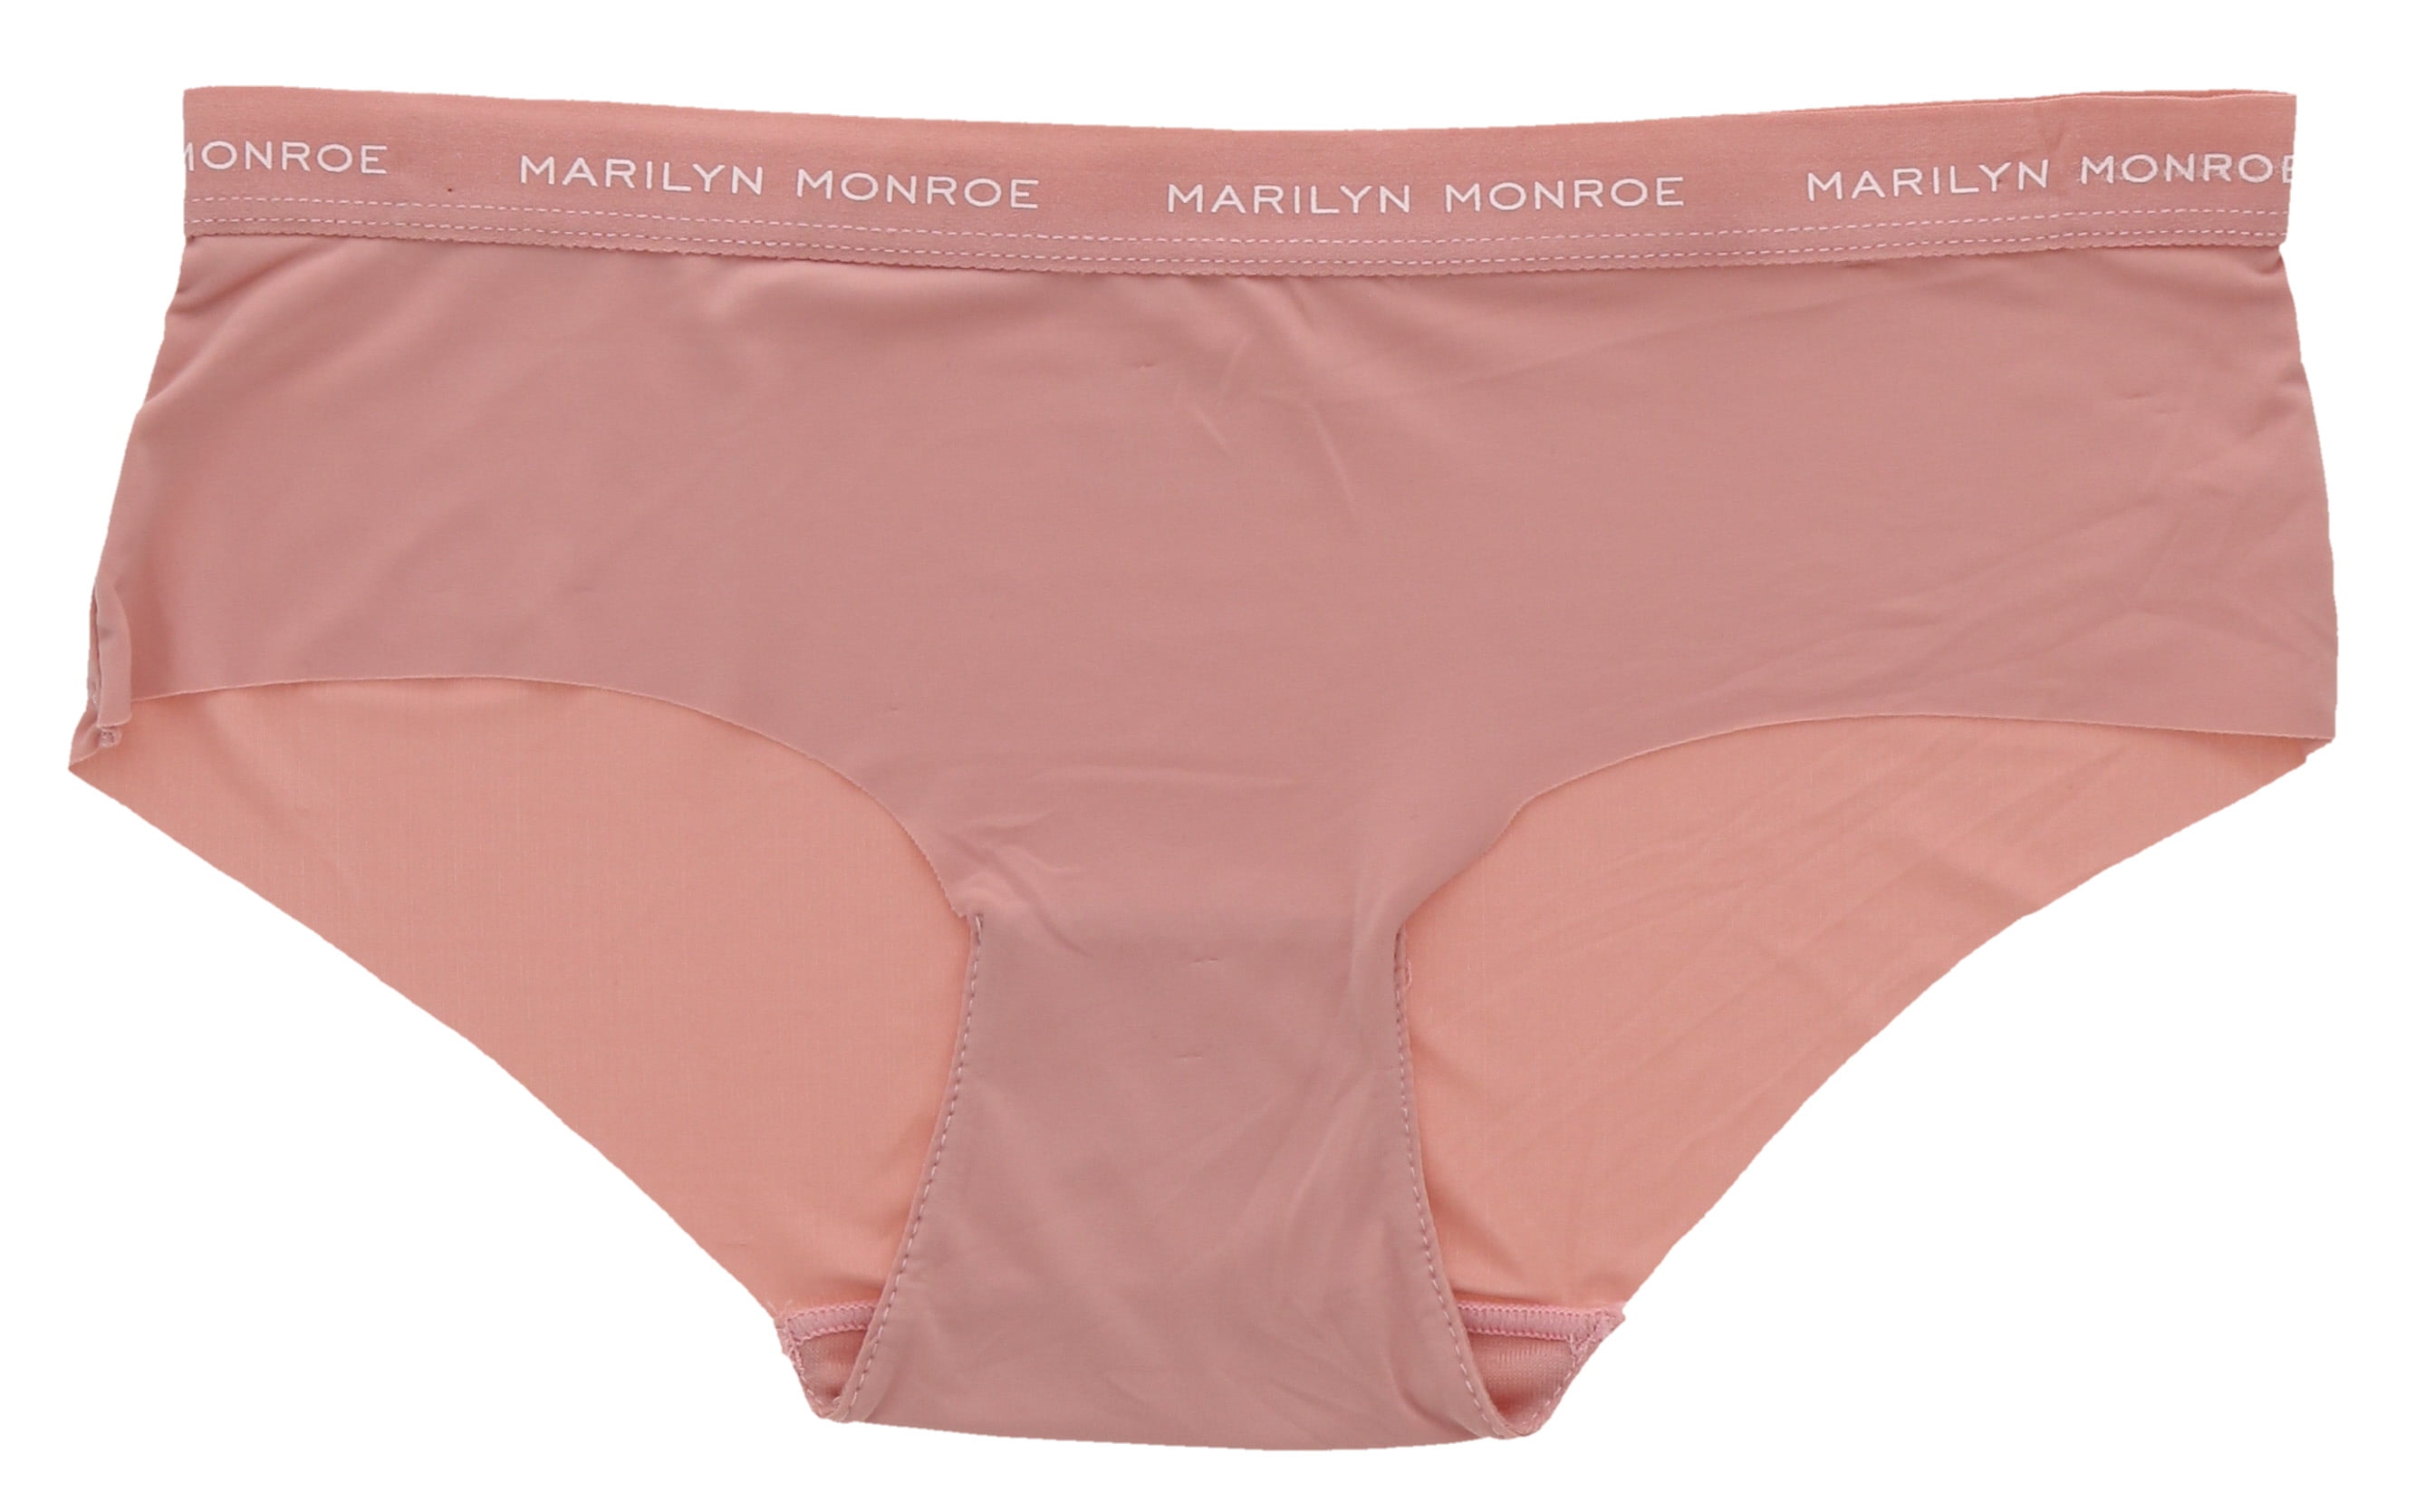 Marilyn Monroe Women's Seamless Sports Band Hipster Panties 5 Pack - Pink  Florals - Large 